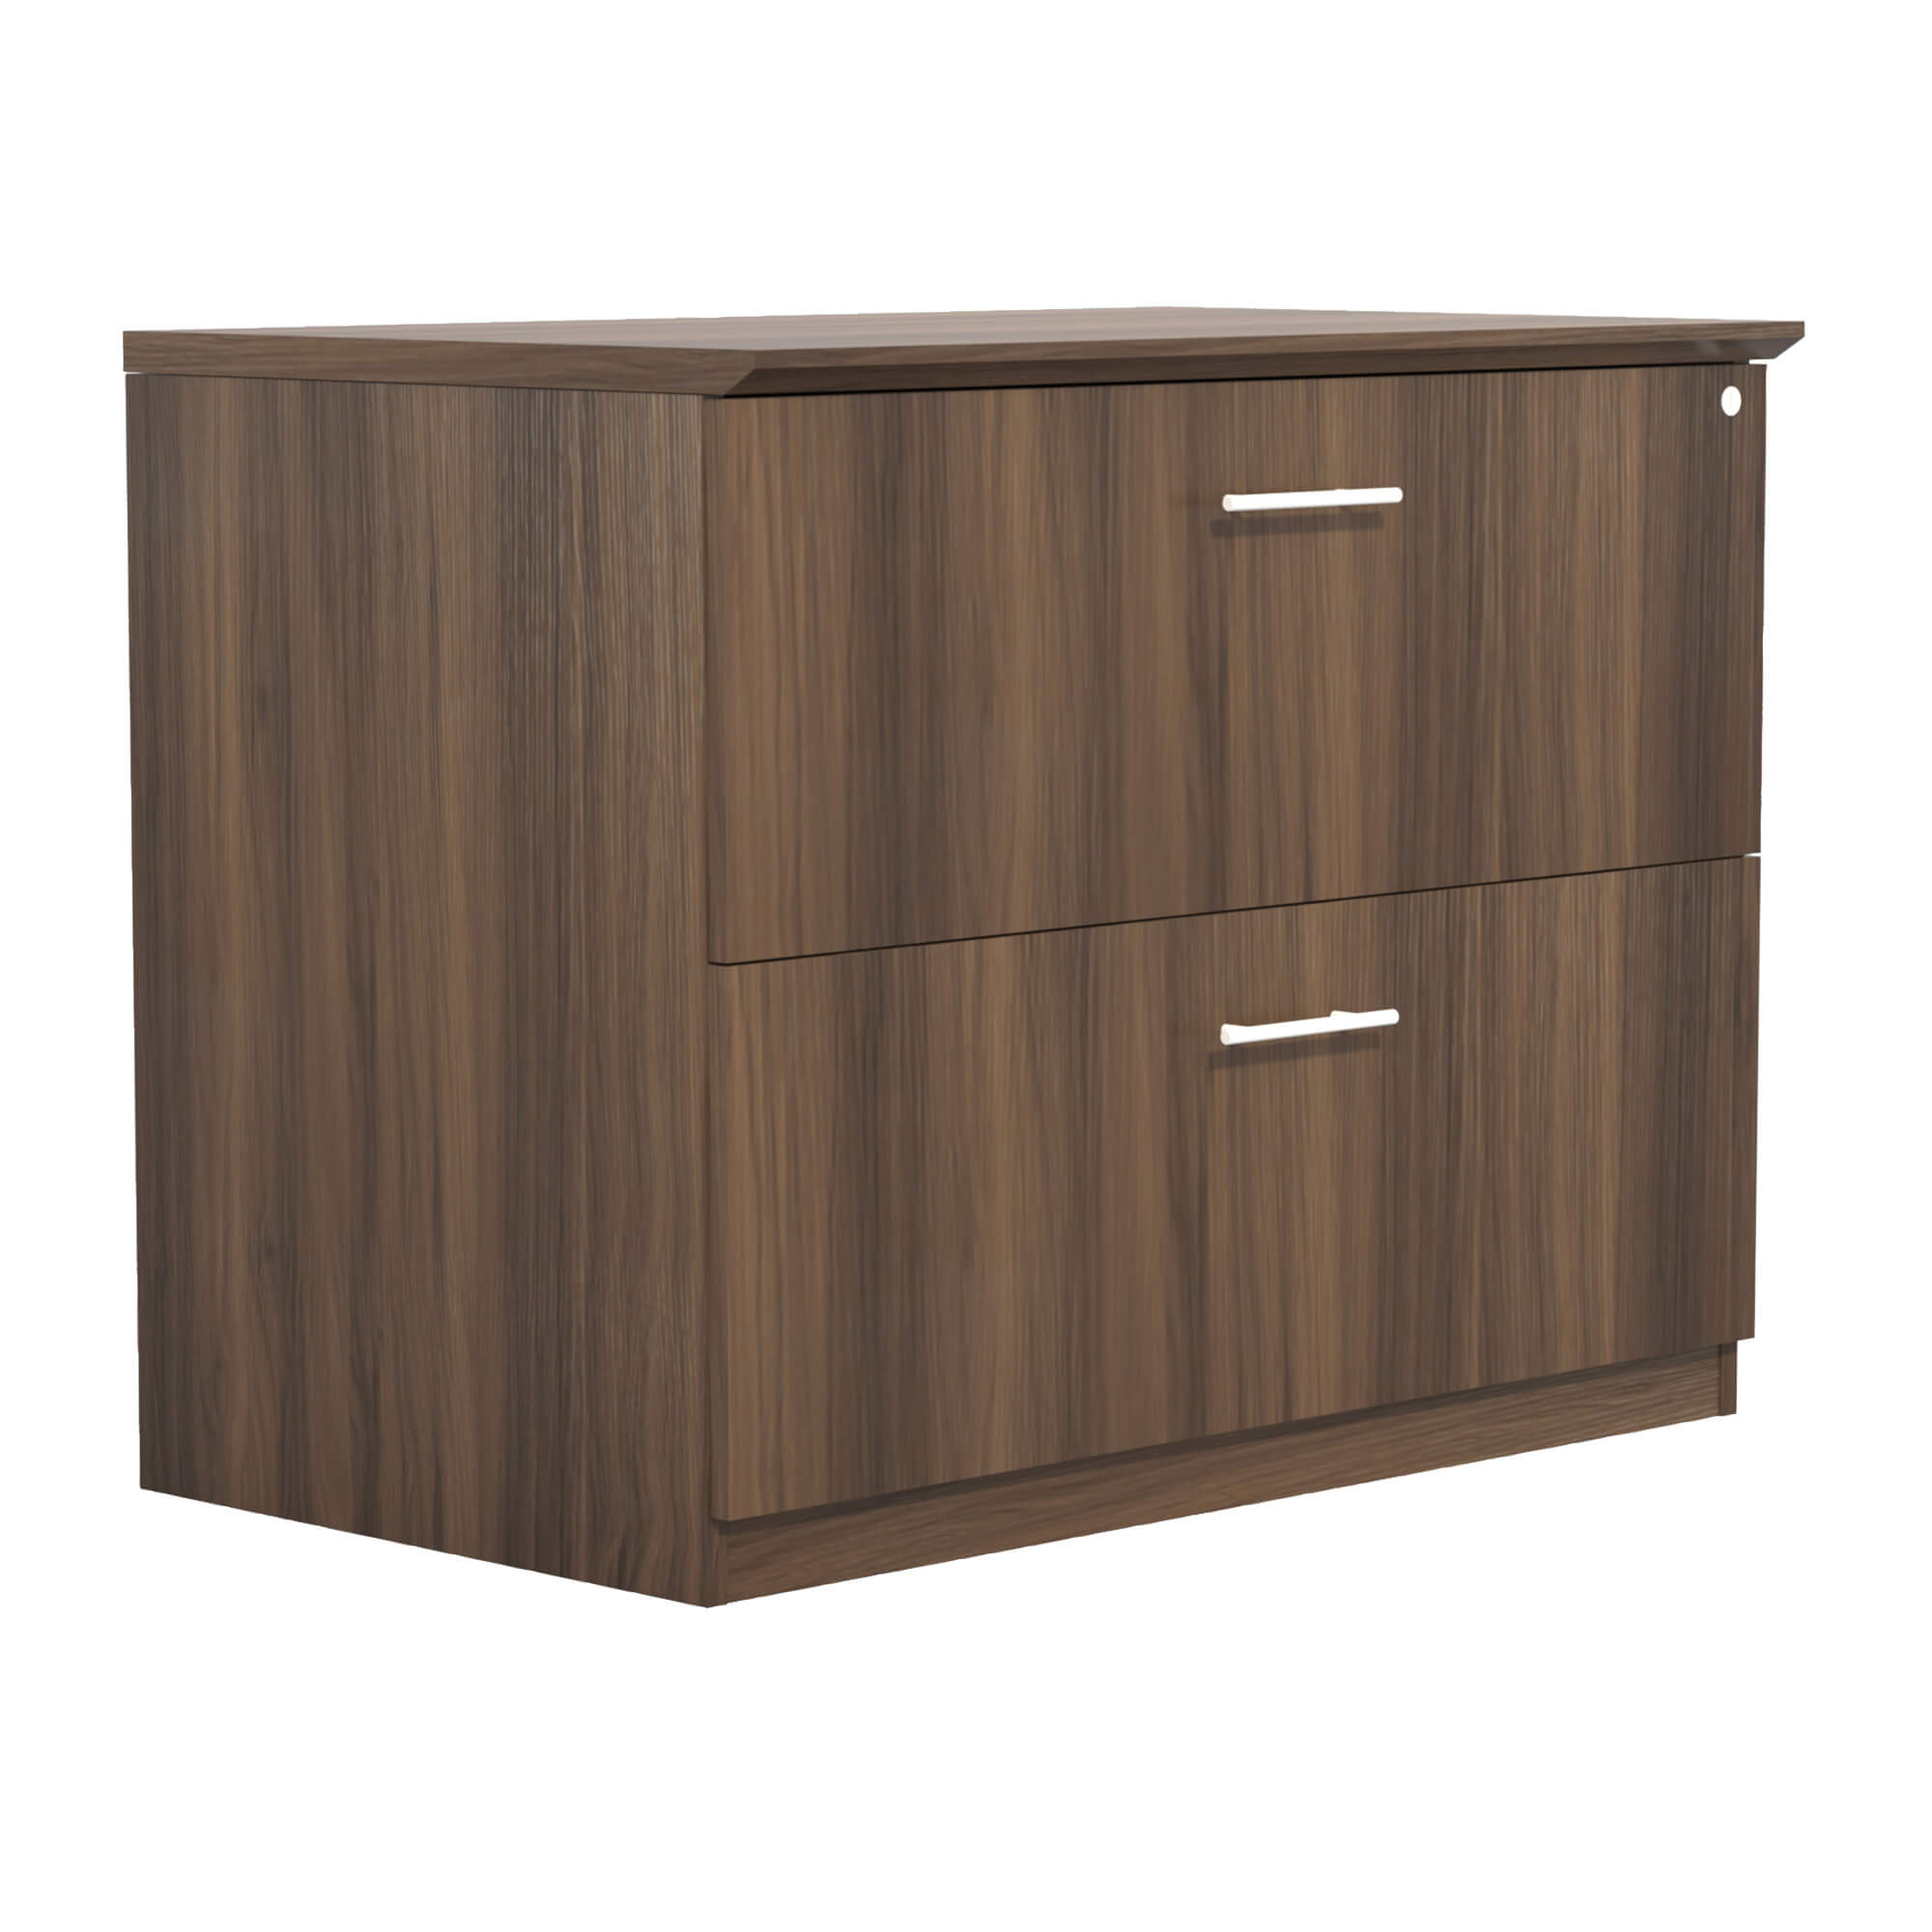 Conference room storage and accessories CUB MVLFTBS FAS